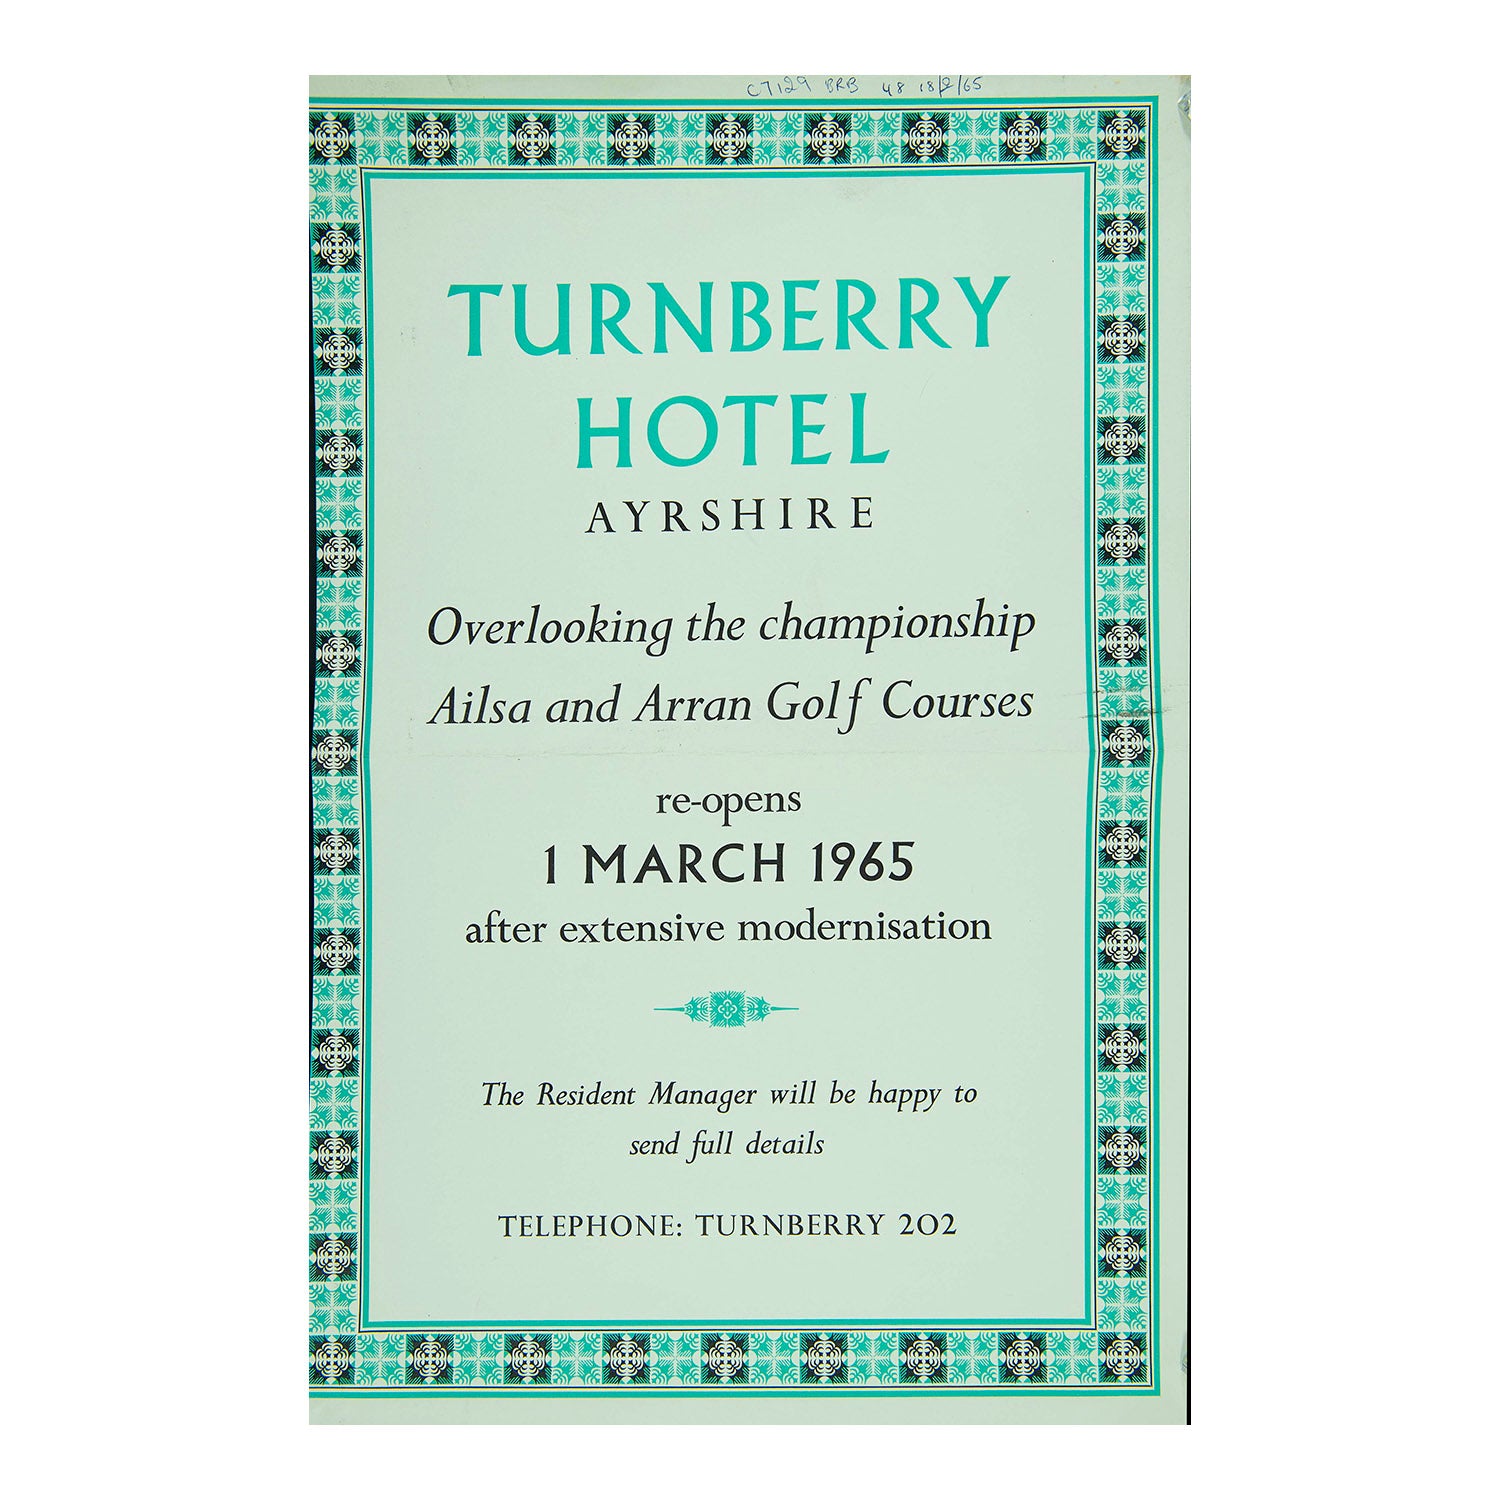 poster for the famous Turnberry Hotel and golf resort, Ayrshire, 1965. The poster, with decorative border designed in-house at the Curwen Press, promotes the “the championship Ailsa and Arran Golf Courses”